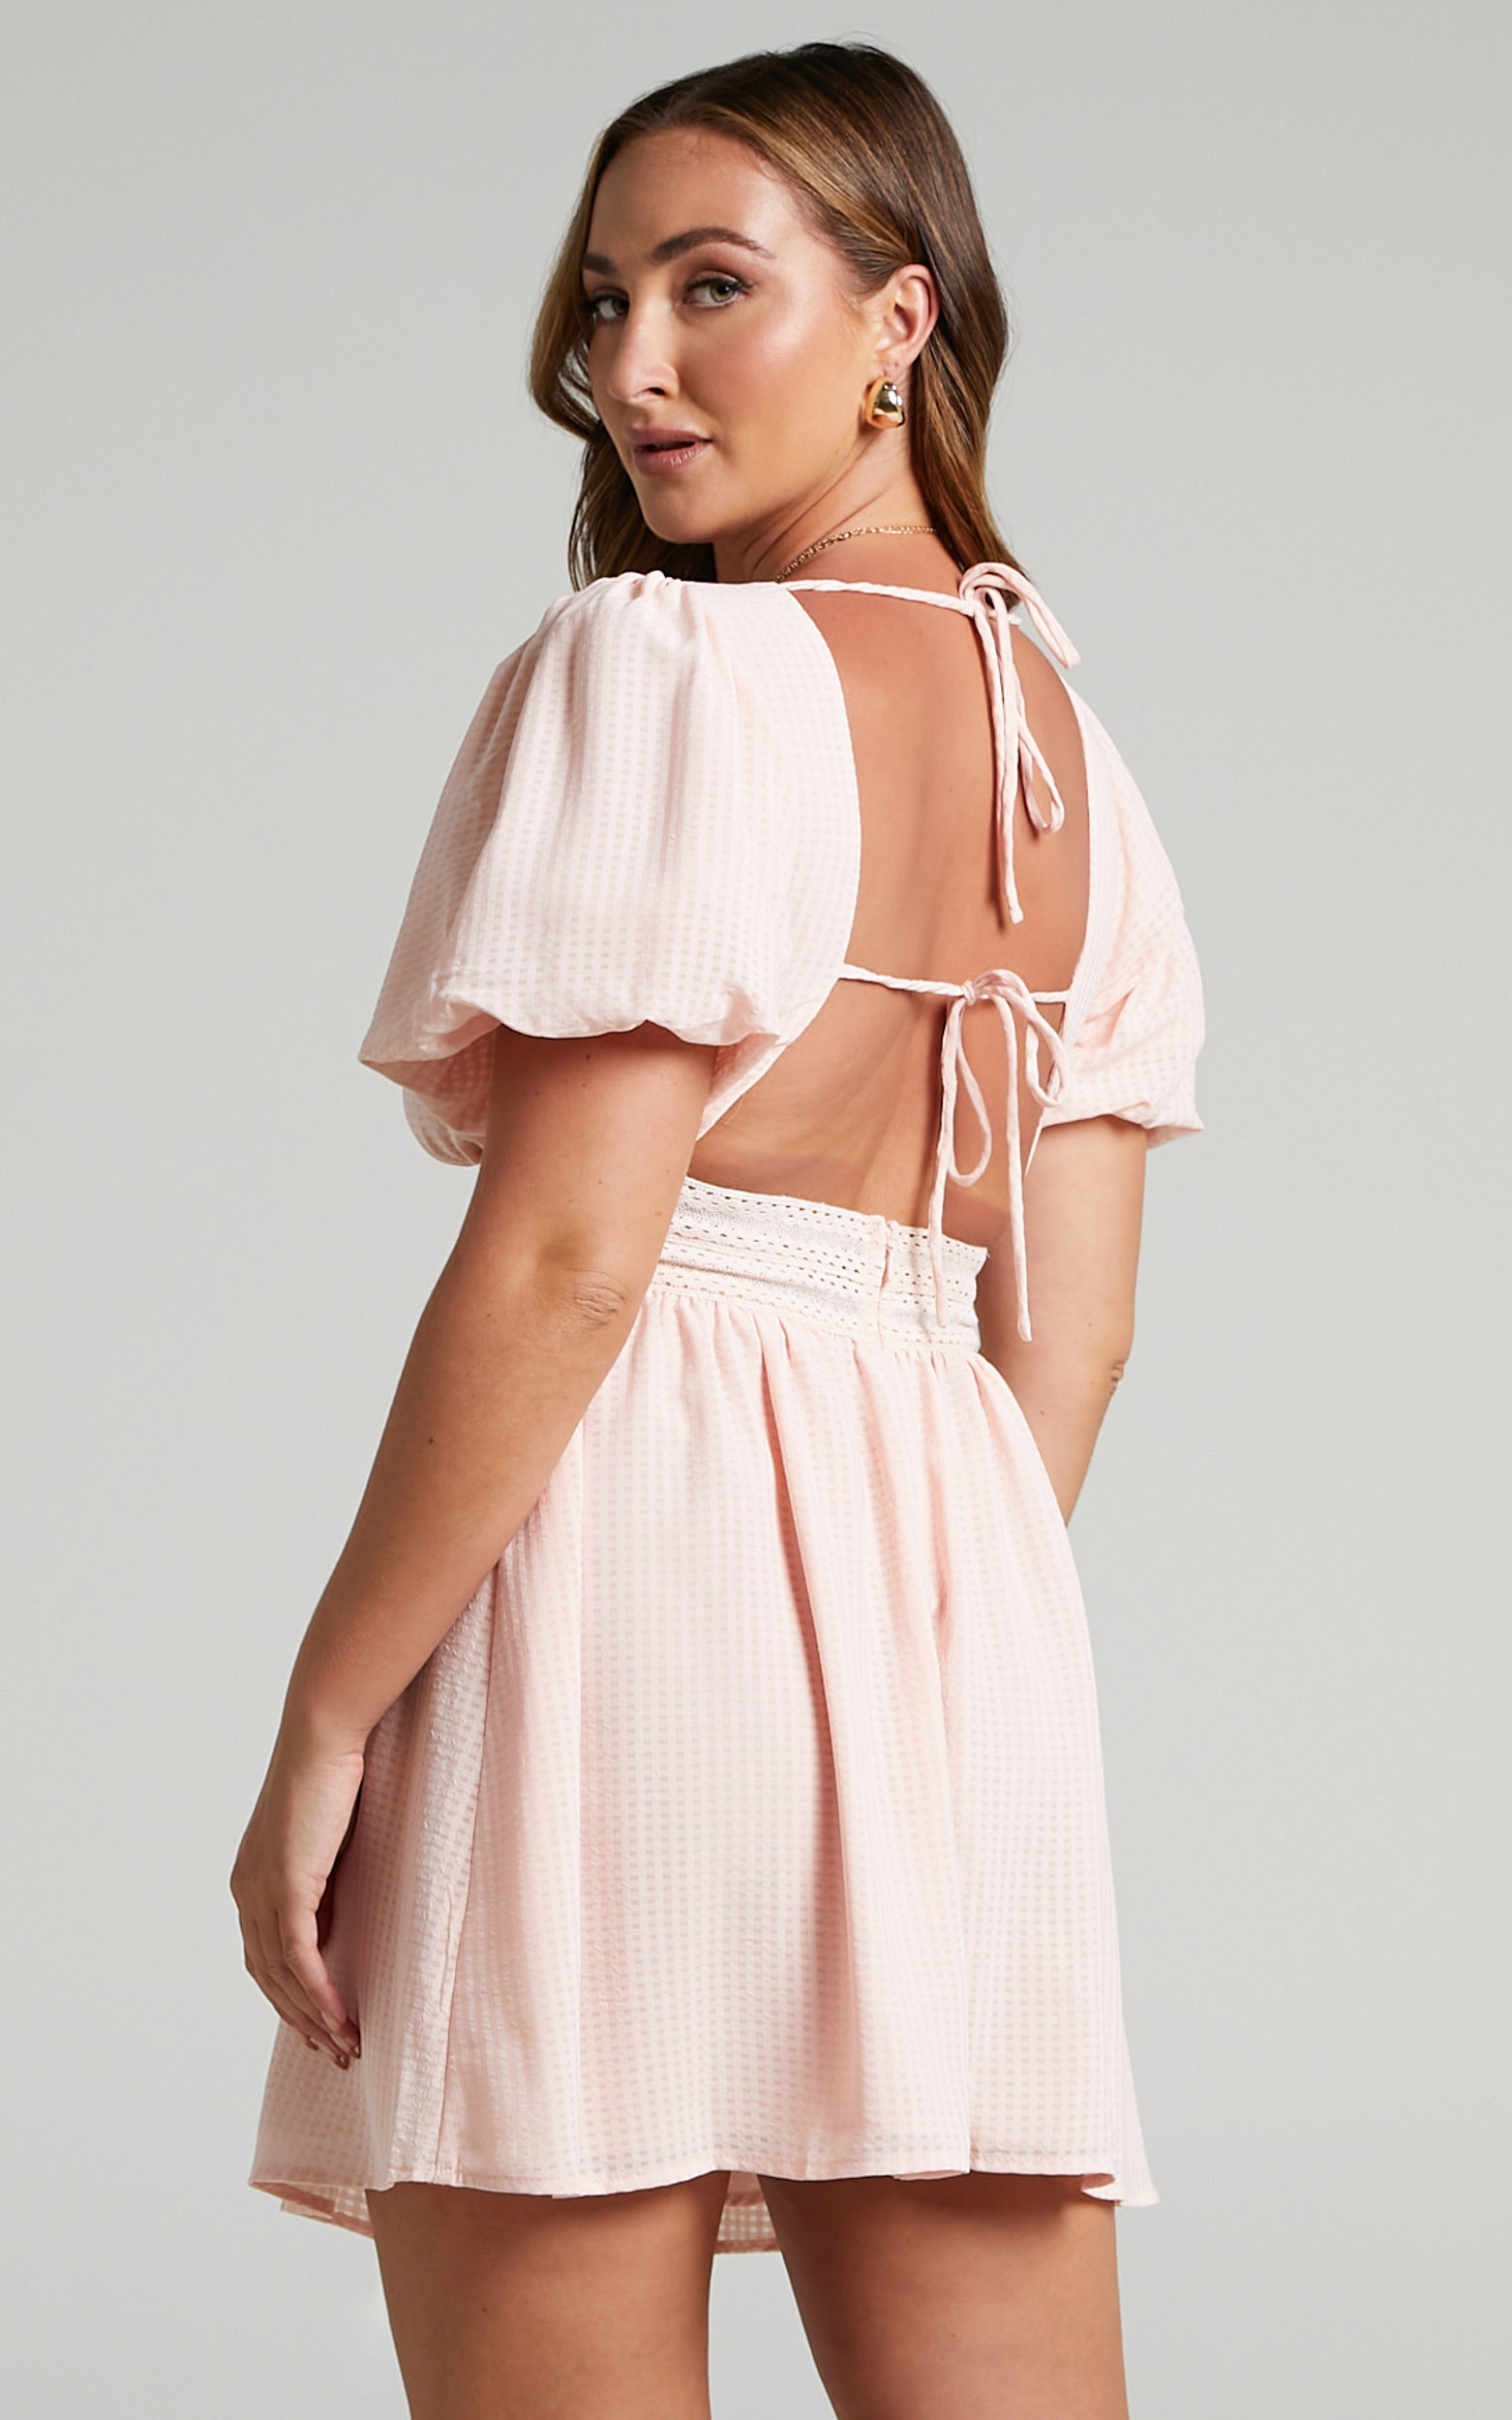 Earlena Puff Sleeve Open Back Mini Dress in Pale Pink - 06, PNK1, hi-res image number null